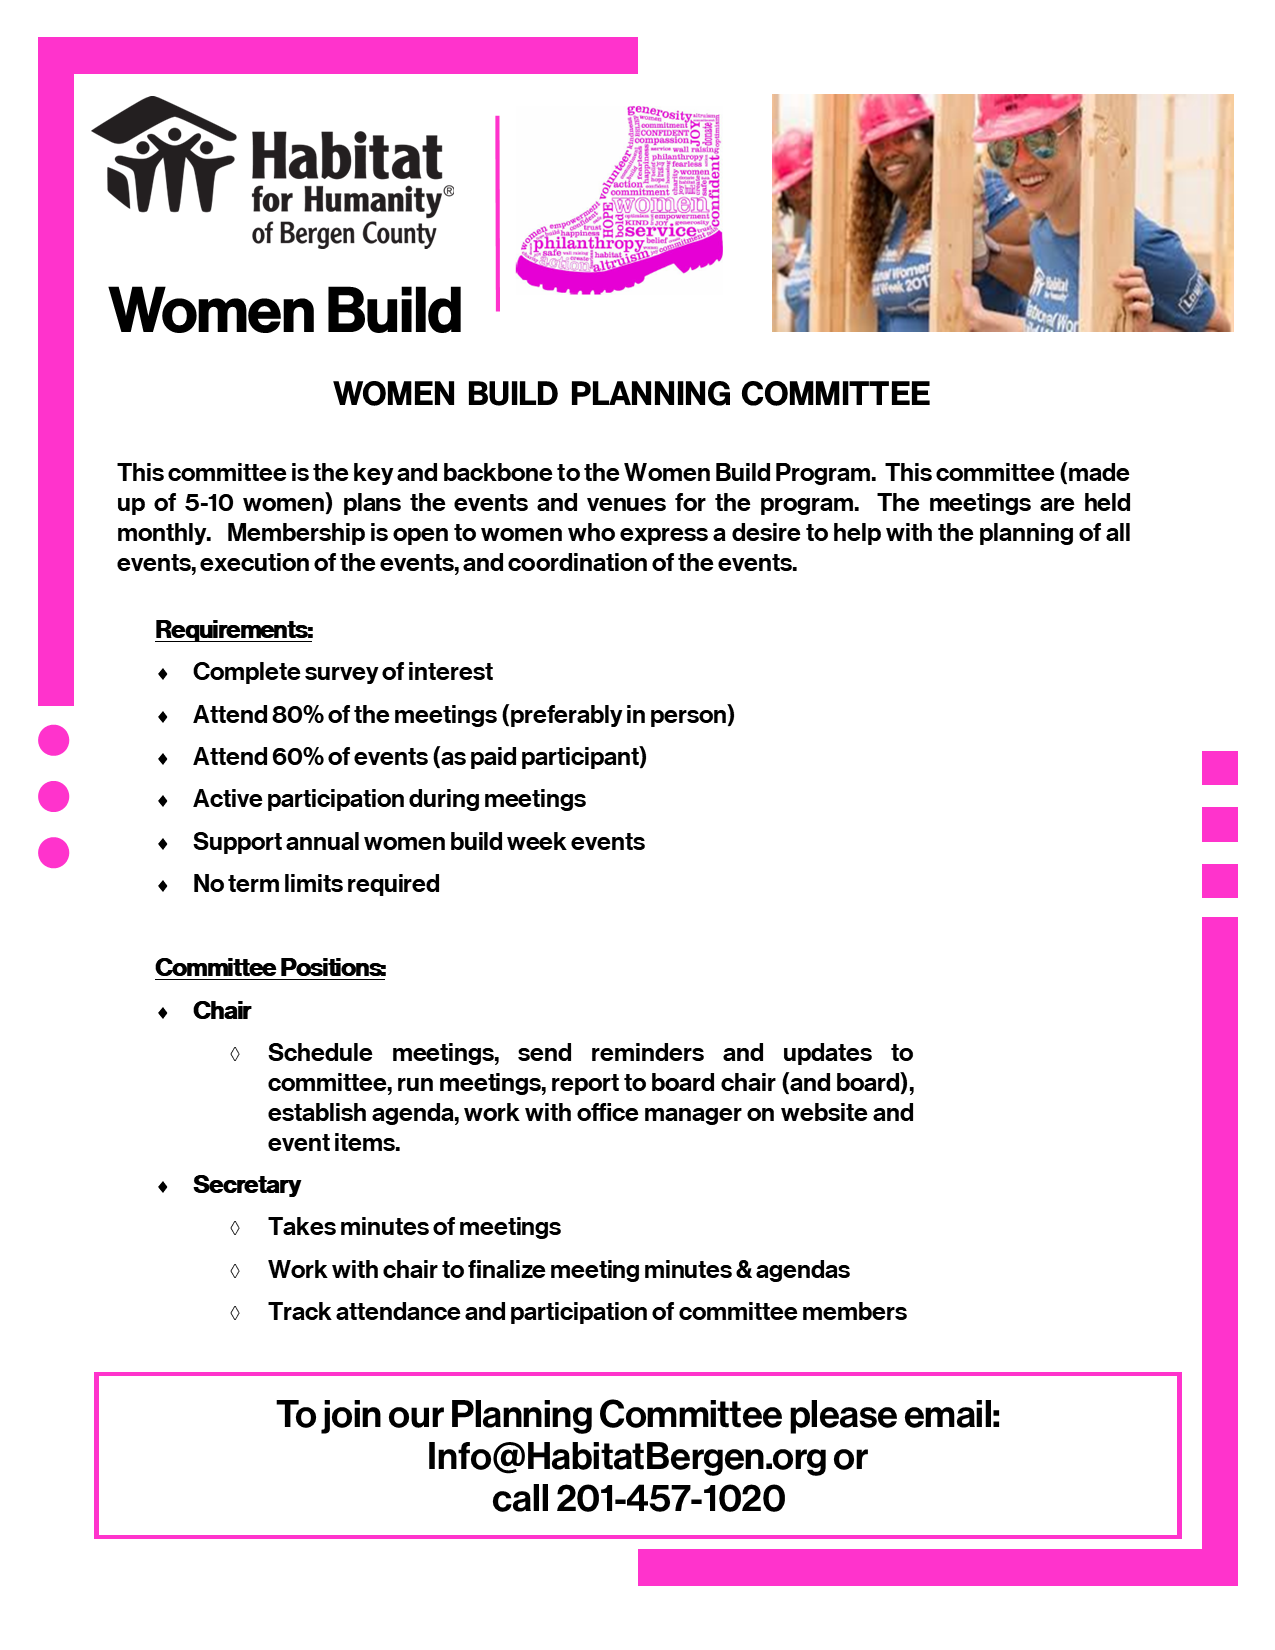 women_build_planning_committee4_png.png